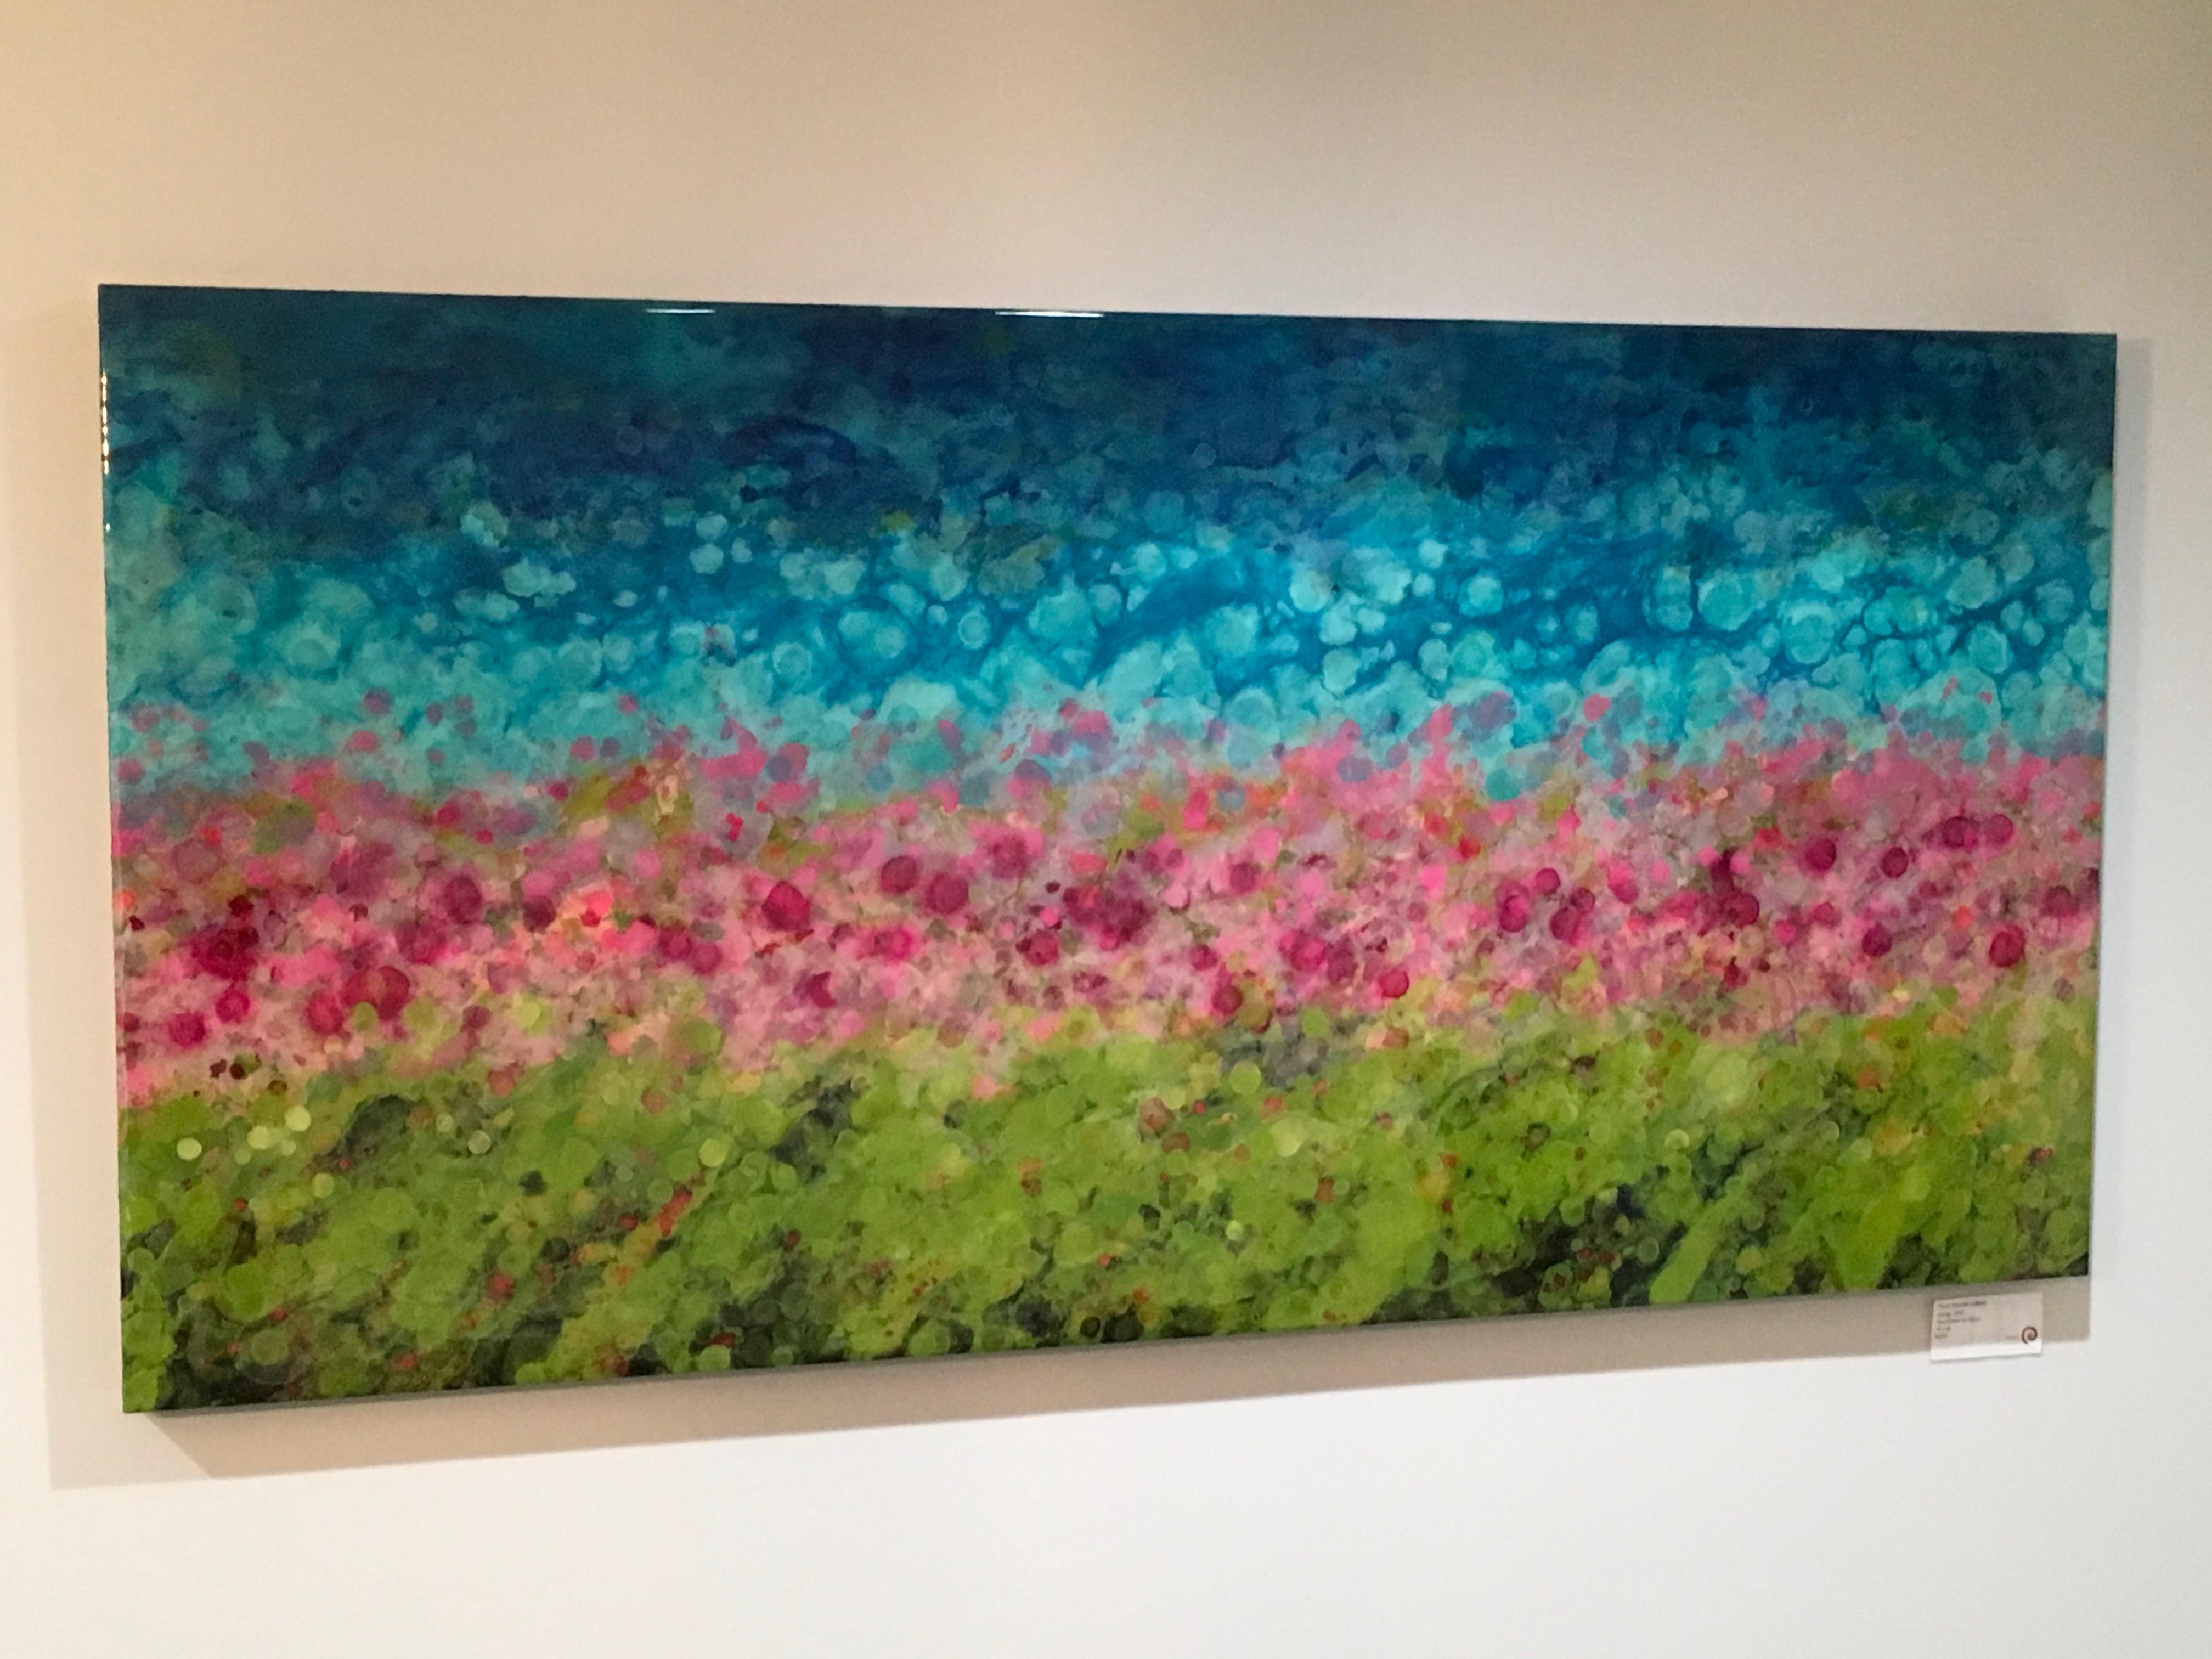 Hyangjia, Colorful Abstract Landscape, Blue, Pink, Green, hi-gloss finish, 30x60 - Painting by Marie Danielle Leblanc